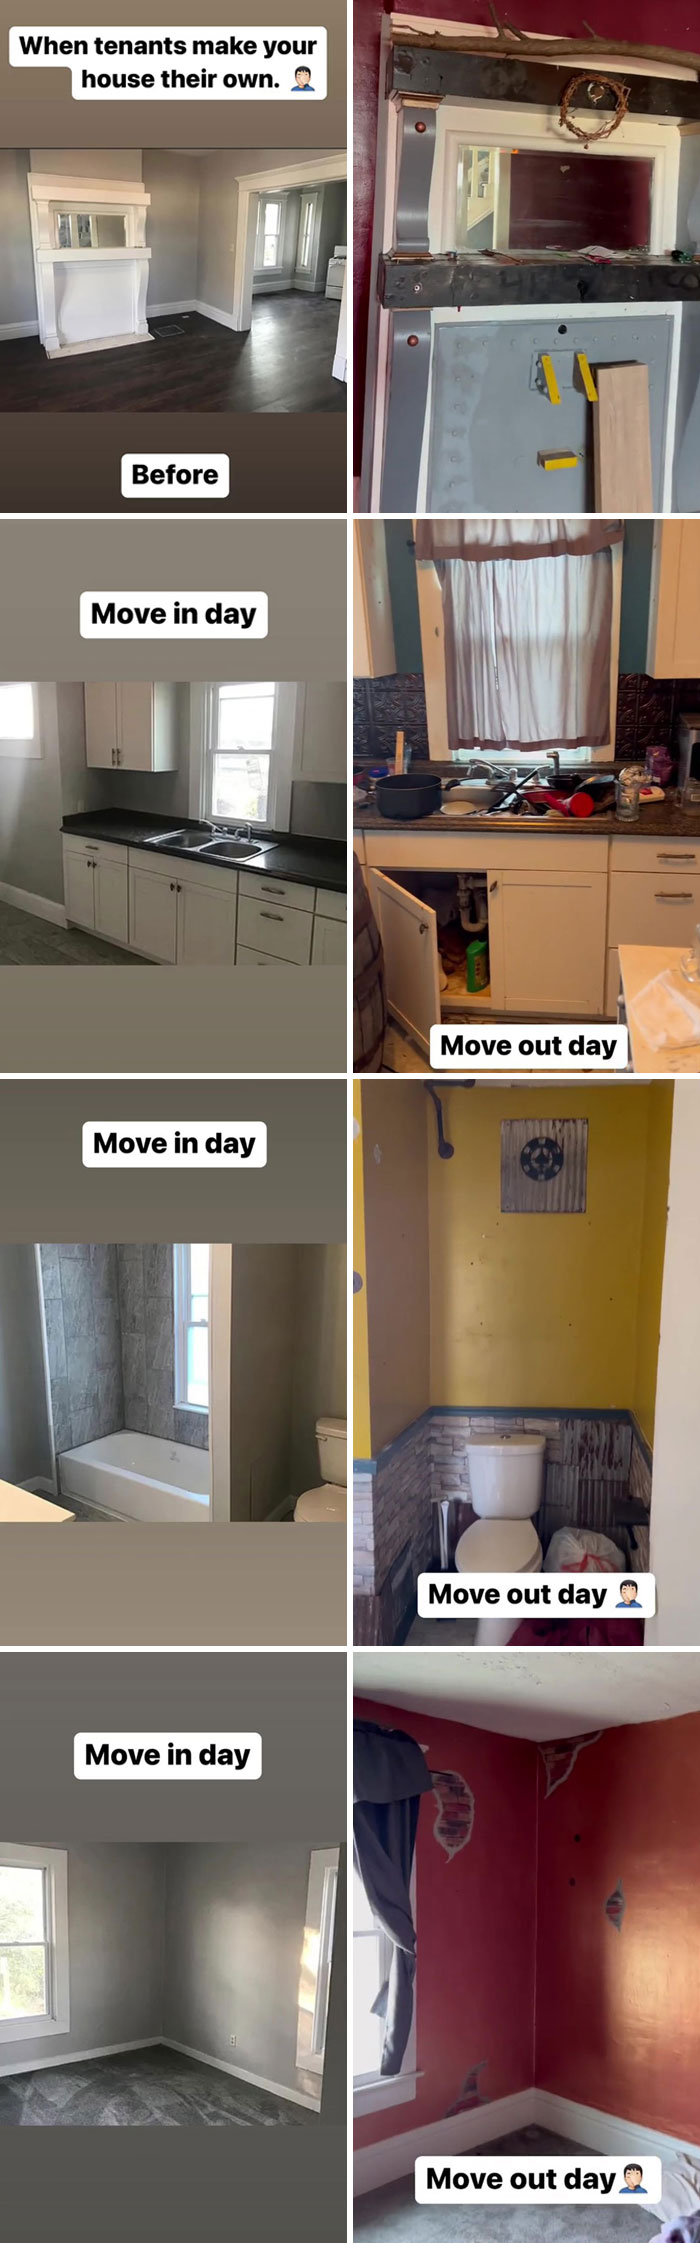 It Turned Out That The Tenants Made Some Incredibly Tasteless Yet DIY-Enthusiastic ‘Renovations’